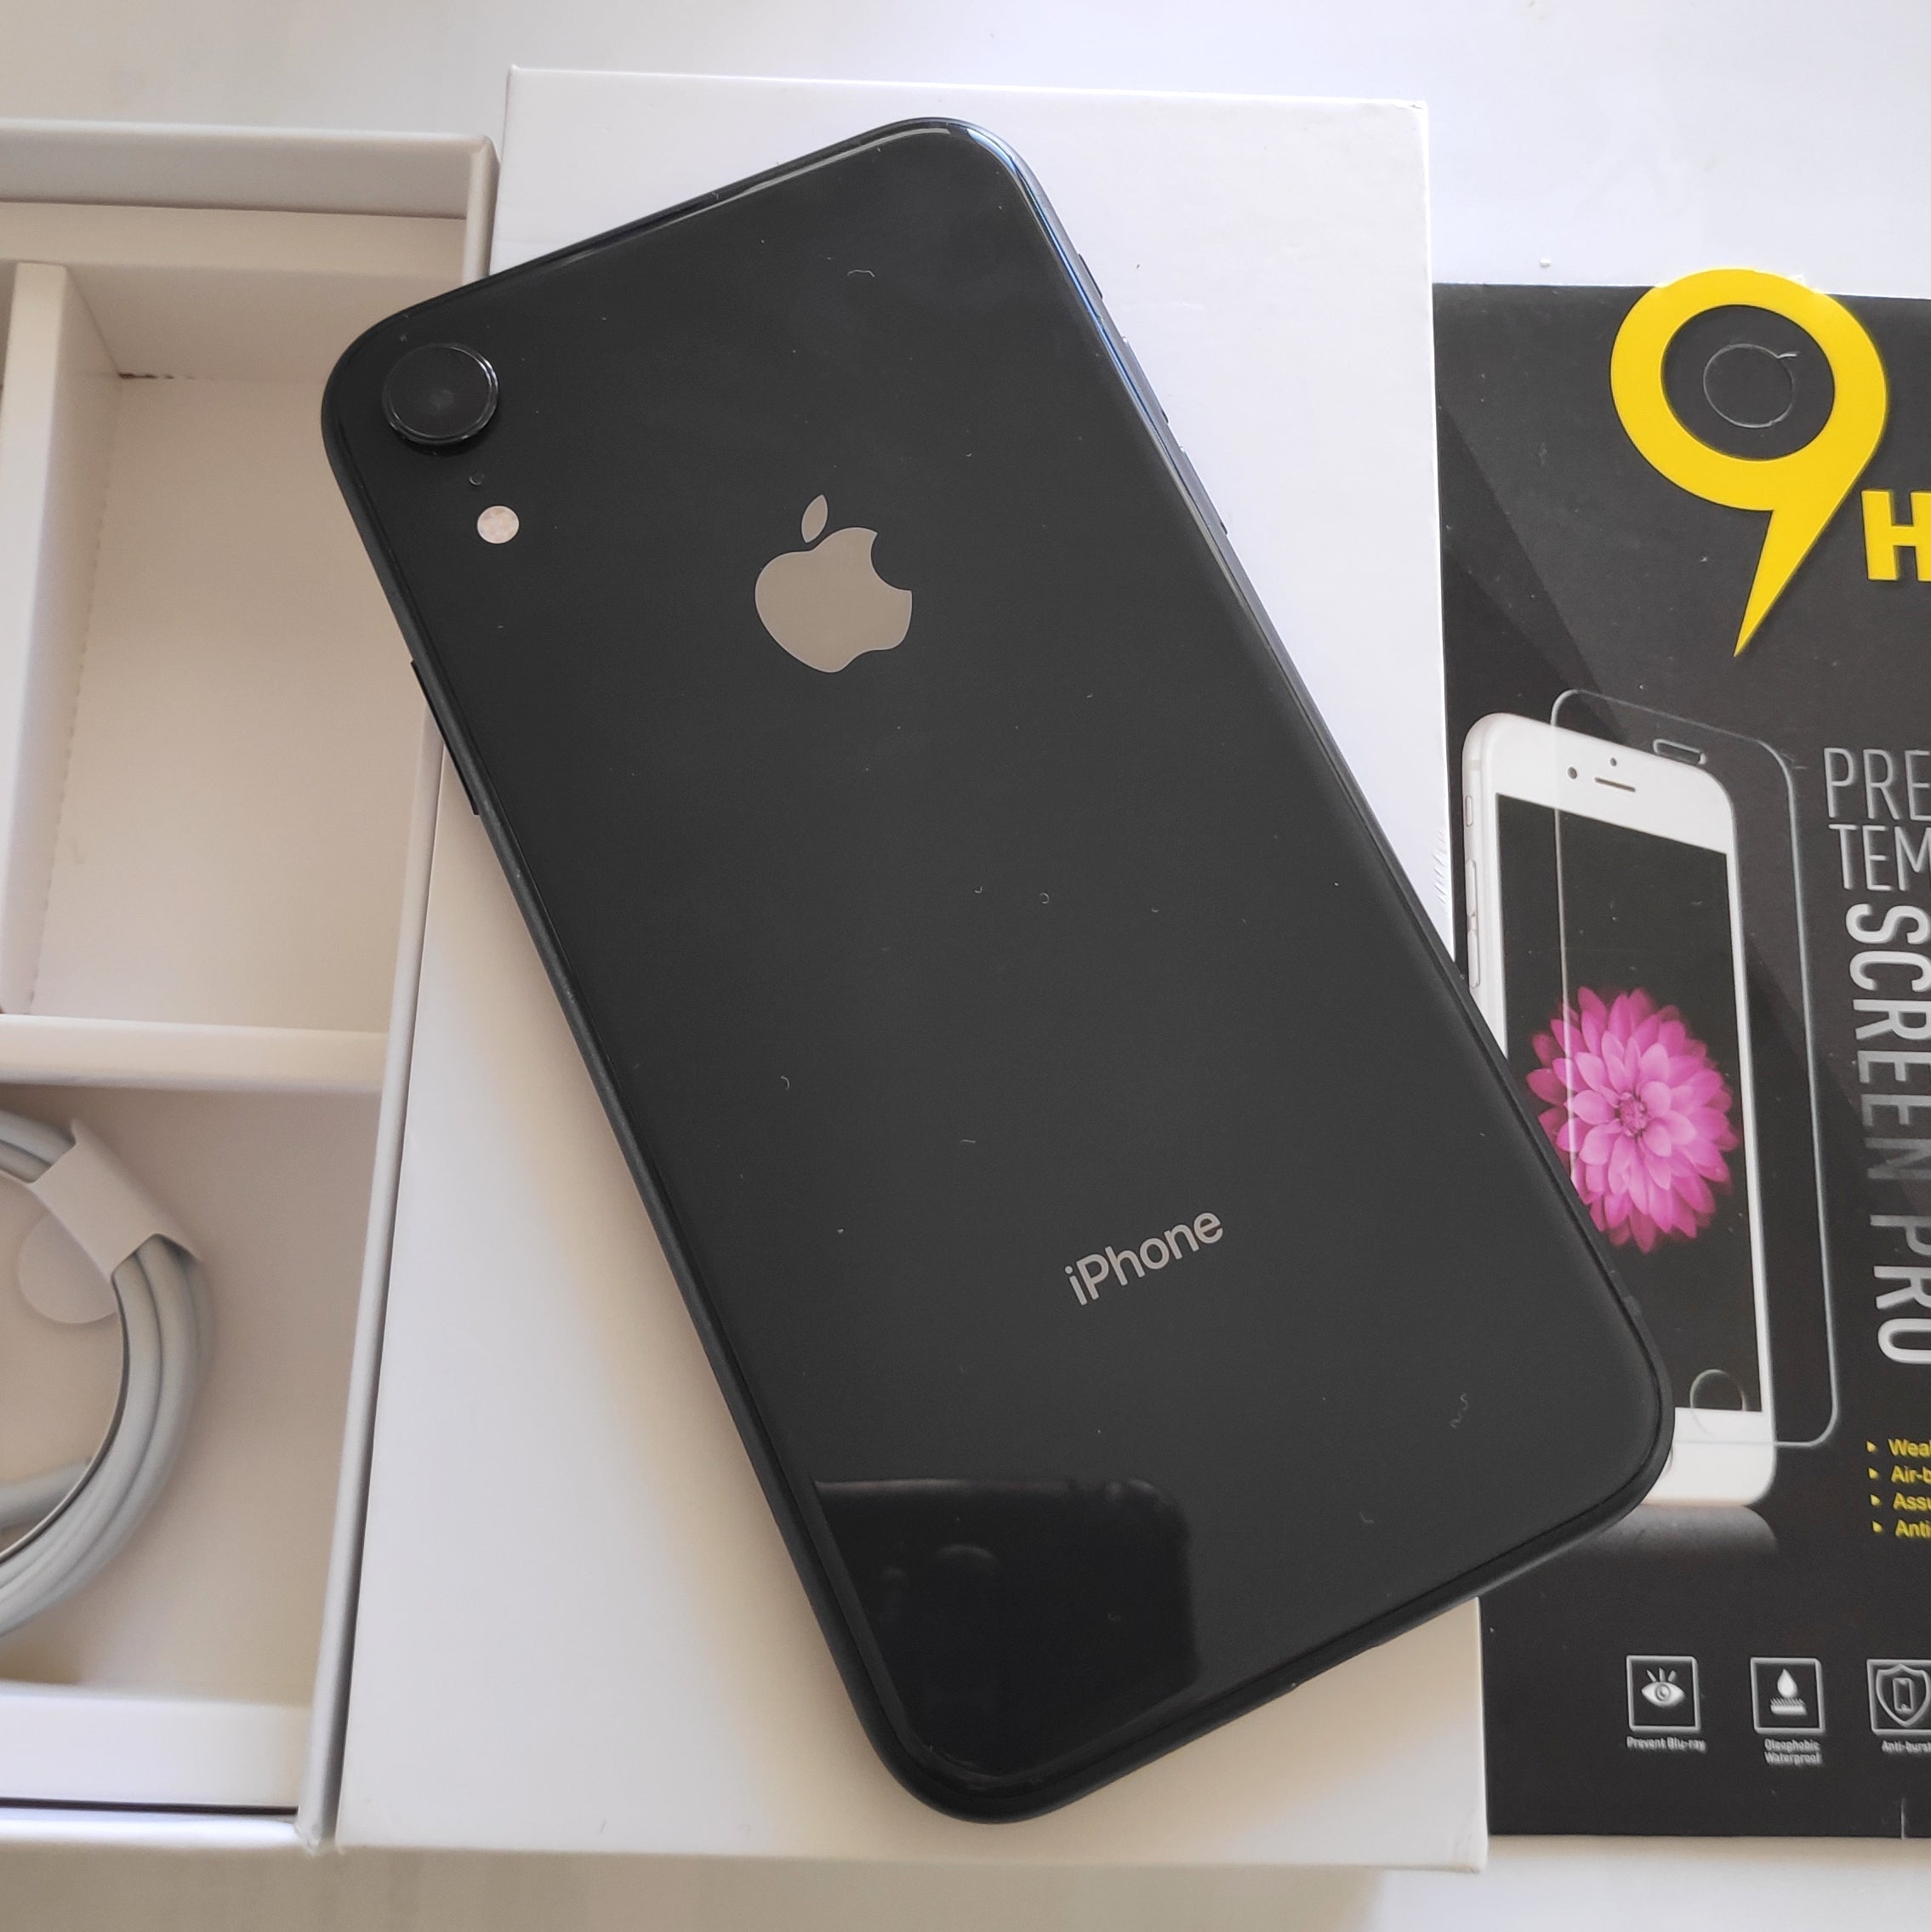 Apple iPhone XR 128GB Black (Like New) New Battery, Case, Glass Screen Protector & Shipping*